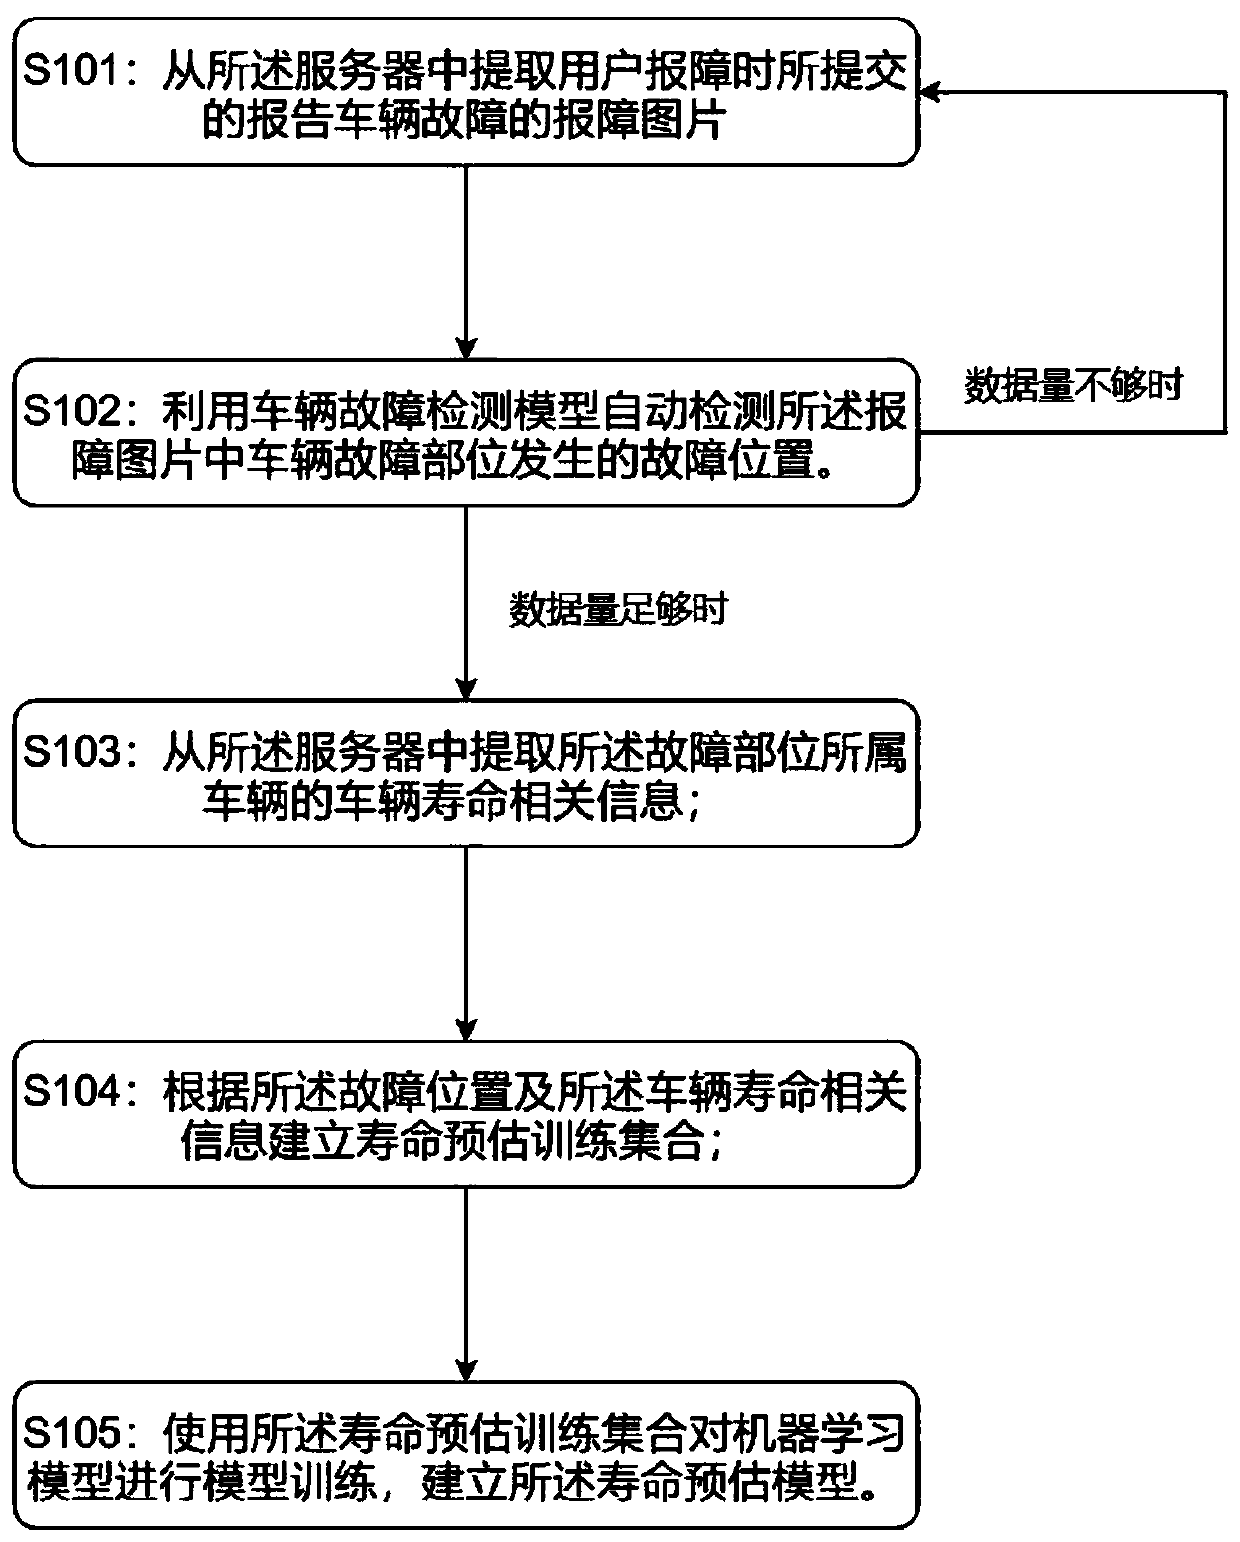 Vehicle part service life prediction method and system based on user fault reporting data